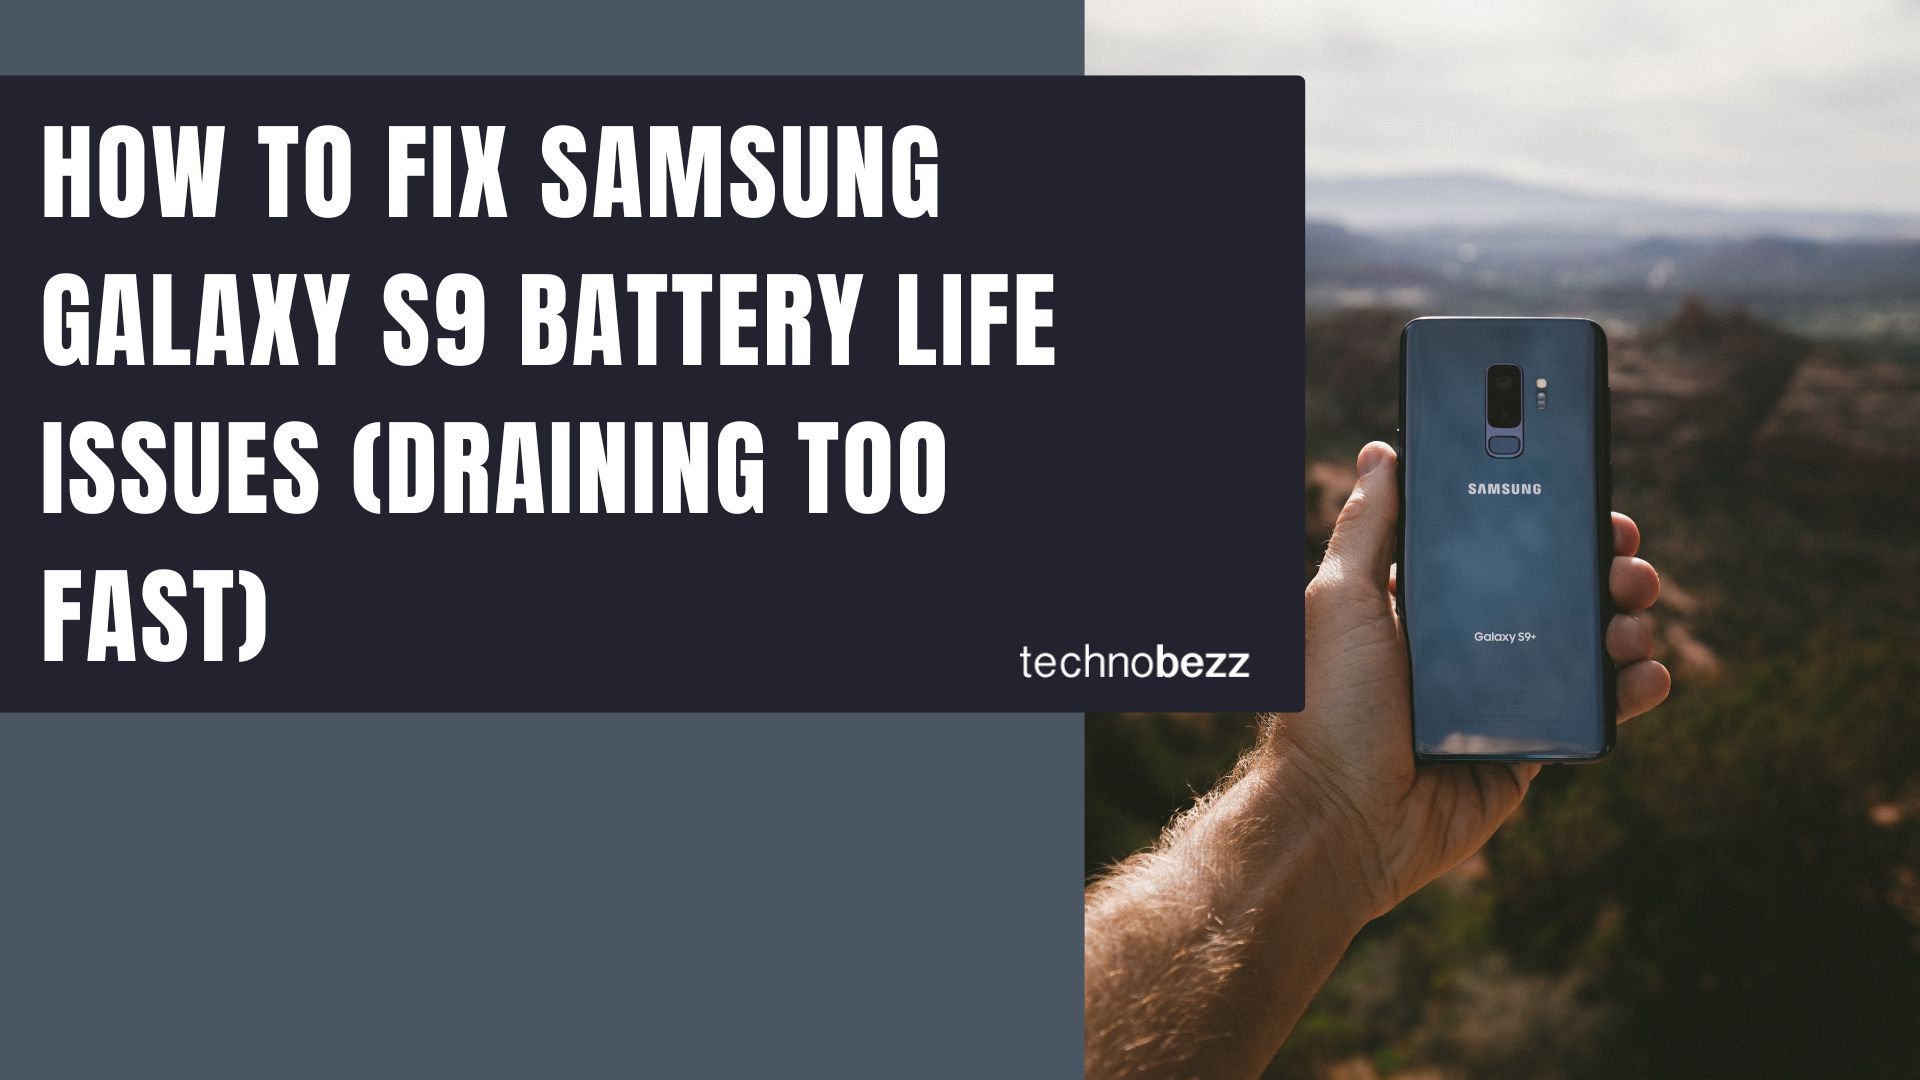 To Fix Samsung Galaxy Battery Life Issues Fast)